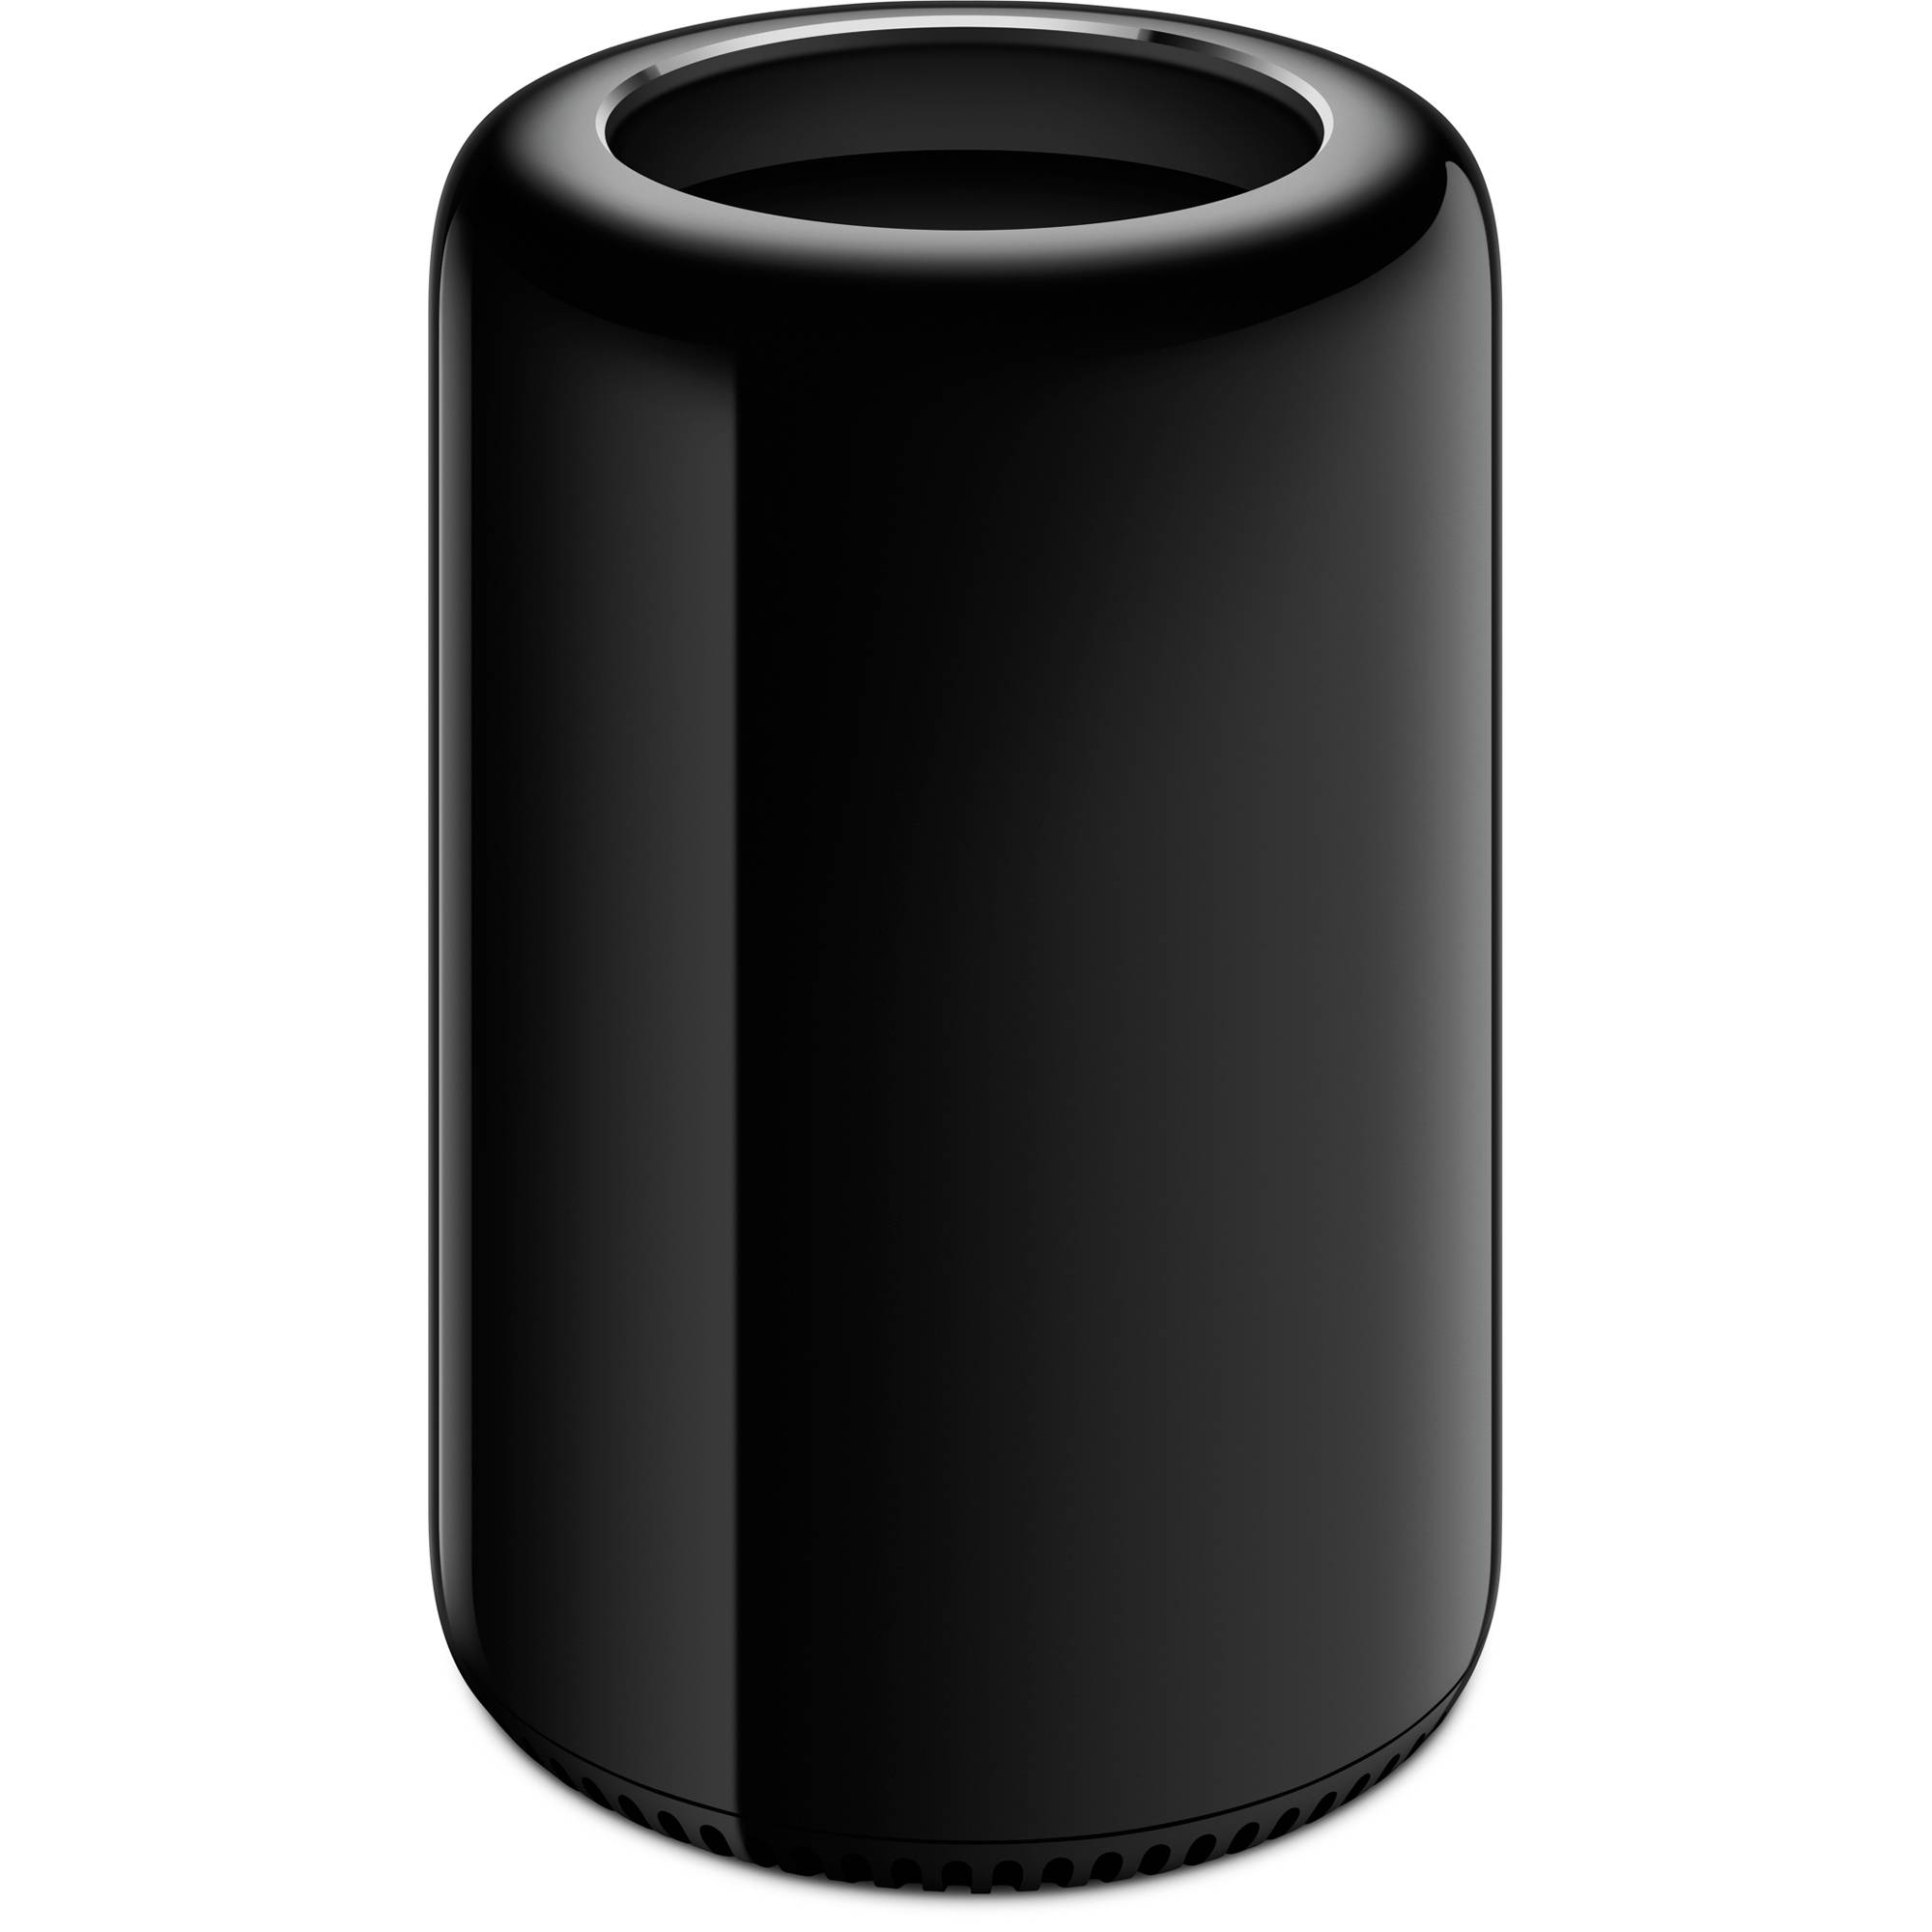 apple mac pro or pc for video editing